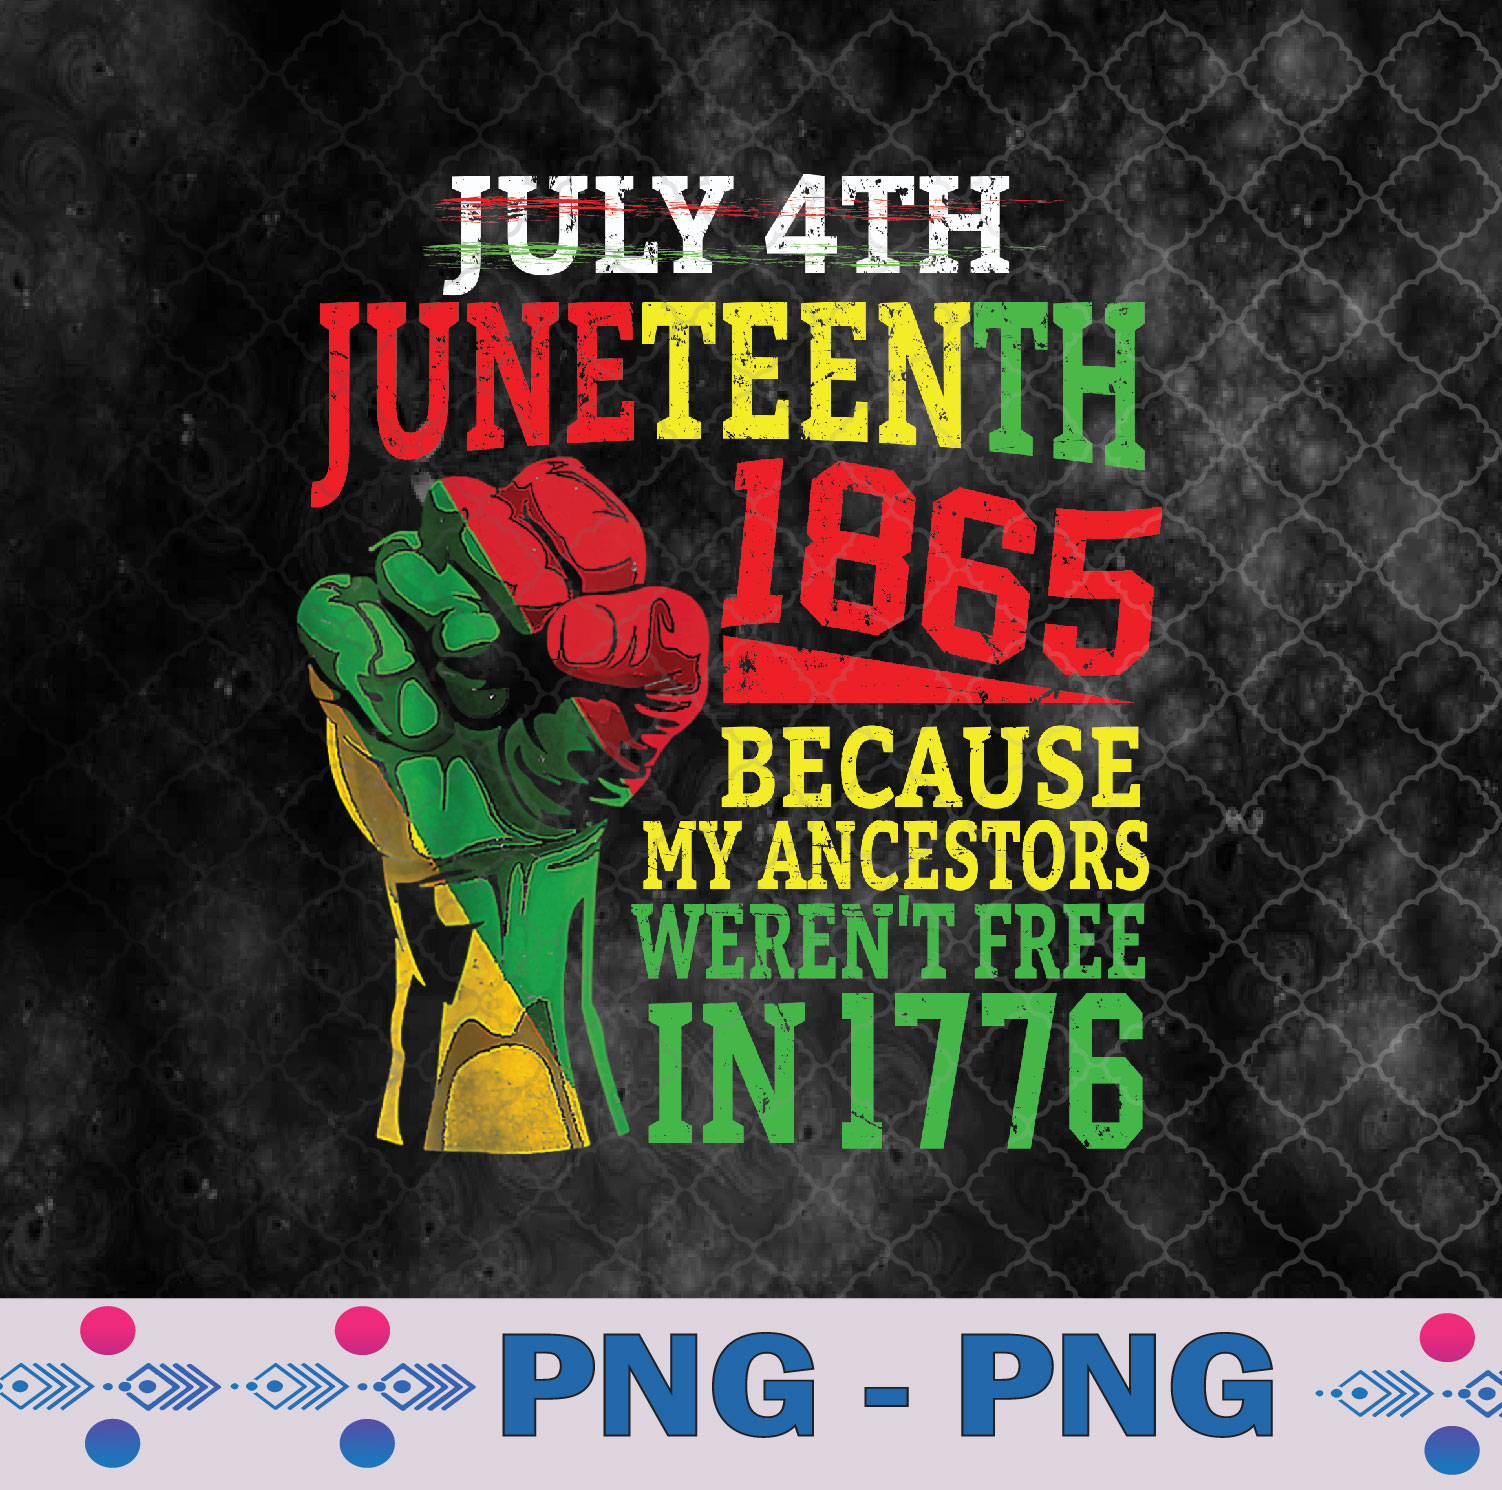 July 4th Juneteenth 1865 Because My Ancestors Png Design